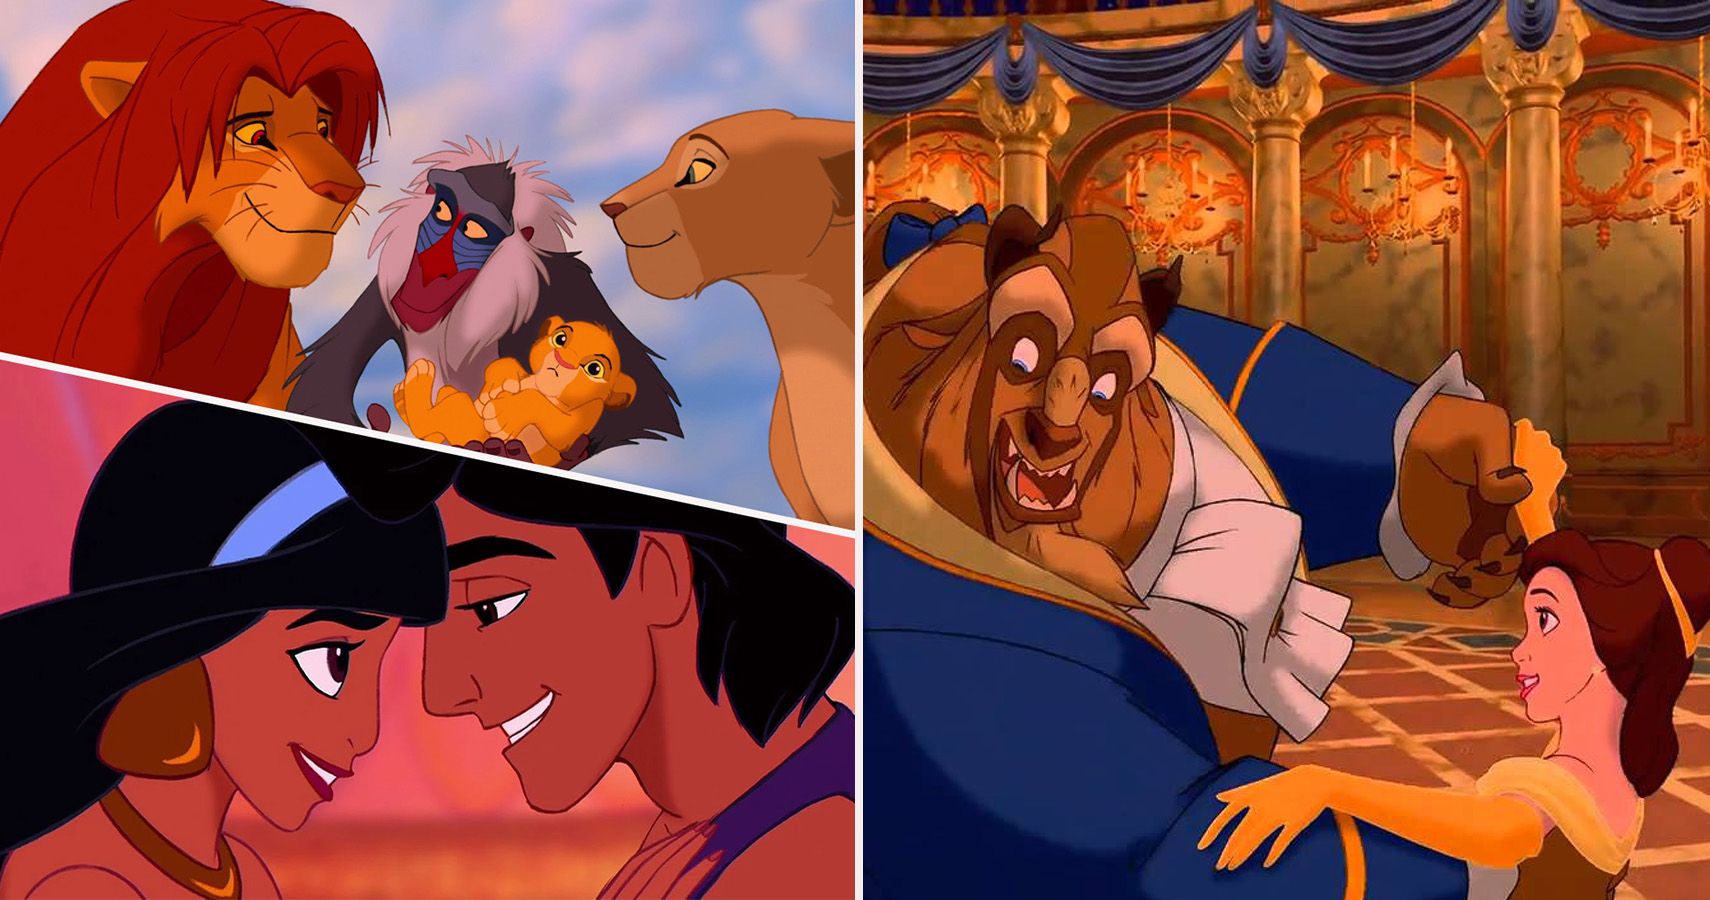 15 Disney Cartoon Couples That Hurt The Movies (And 10 That Saved Them)